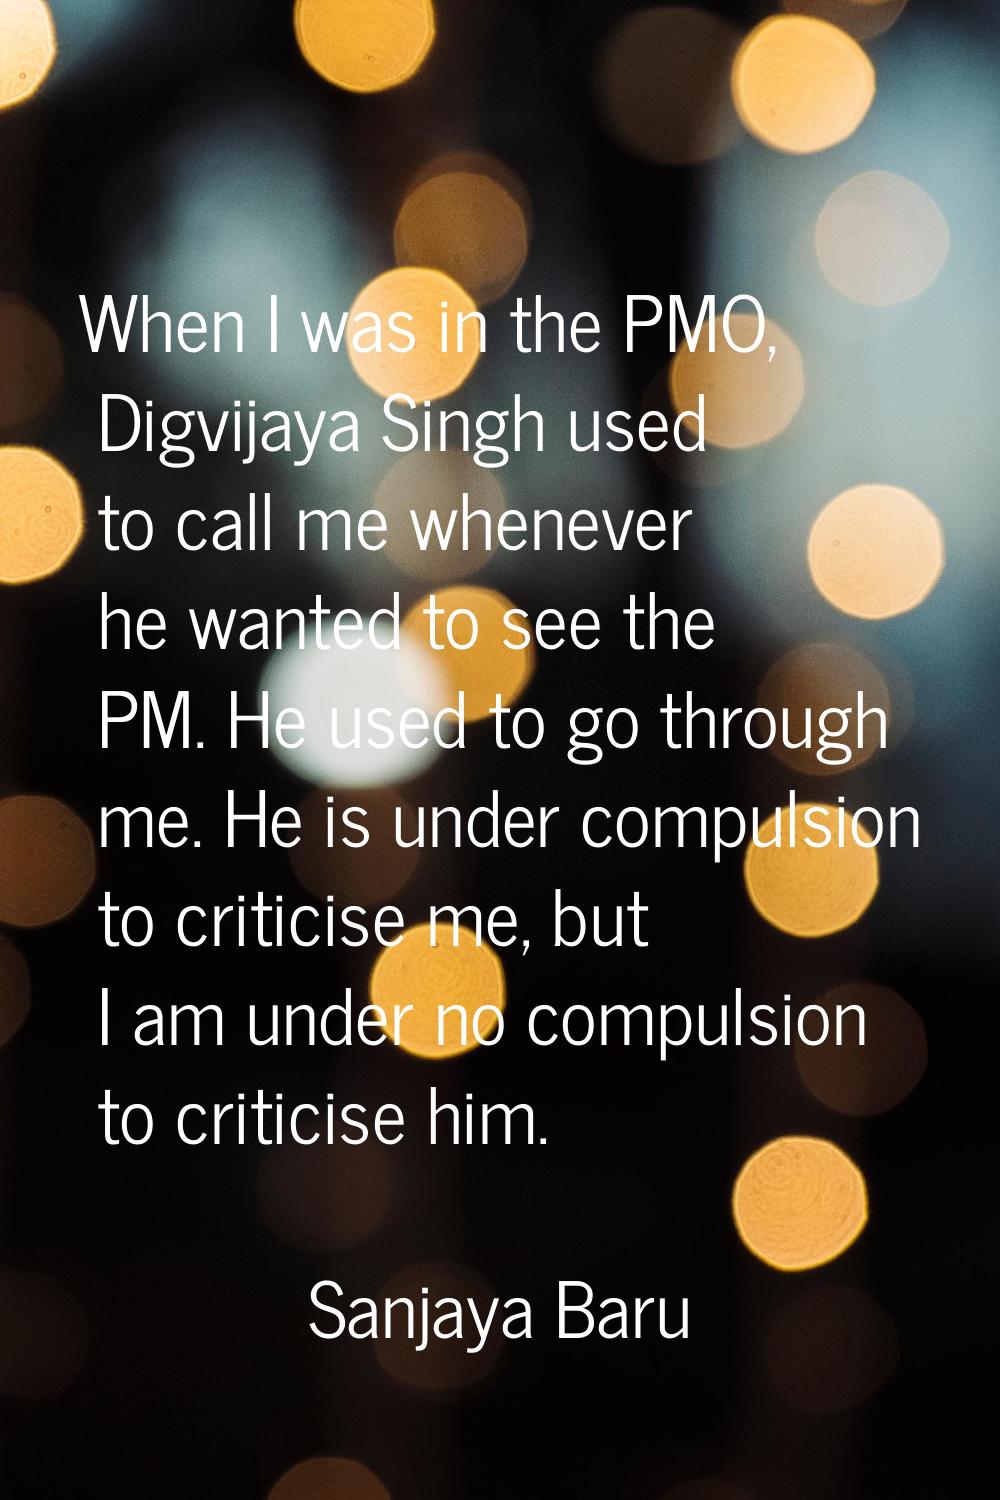 When I was in the PMO, Digvijaya Singh used to call me whenever he wanted to see the PM. He used to